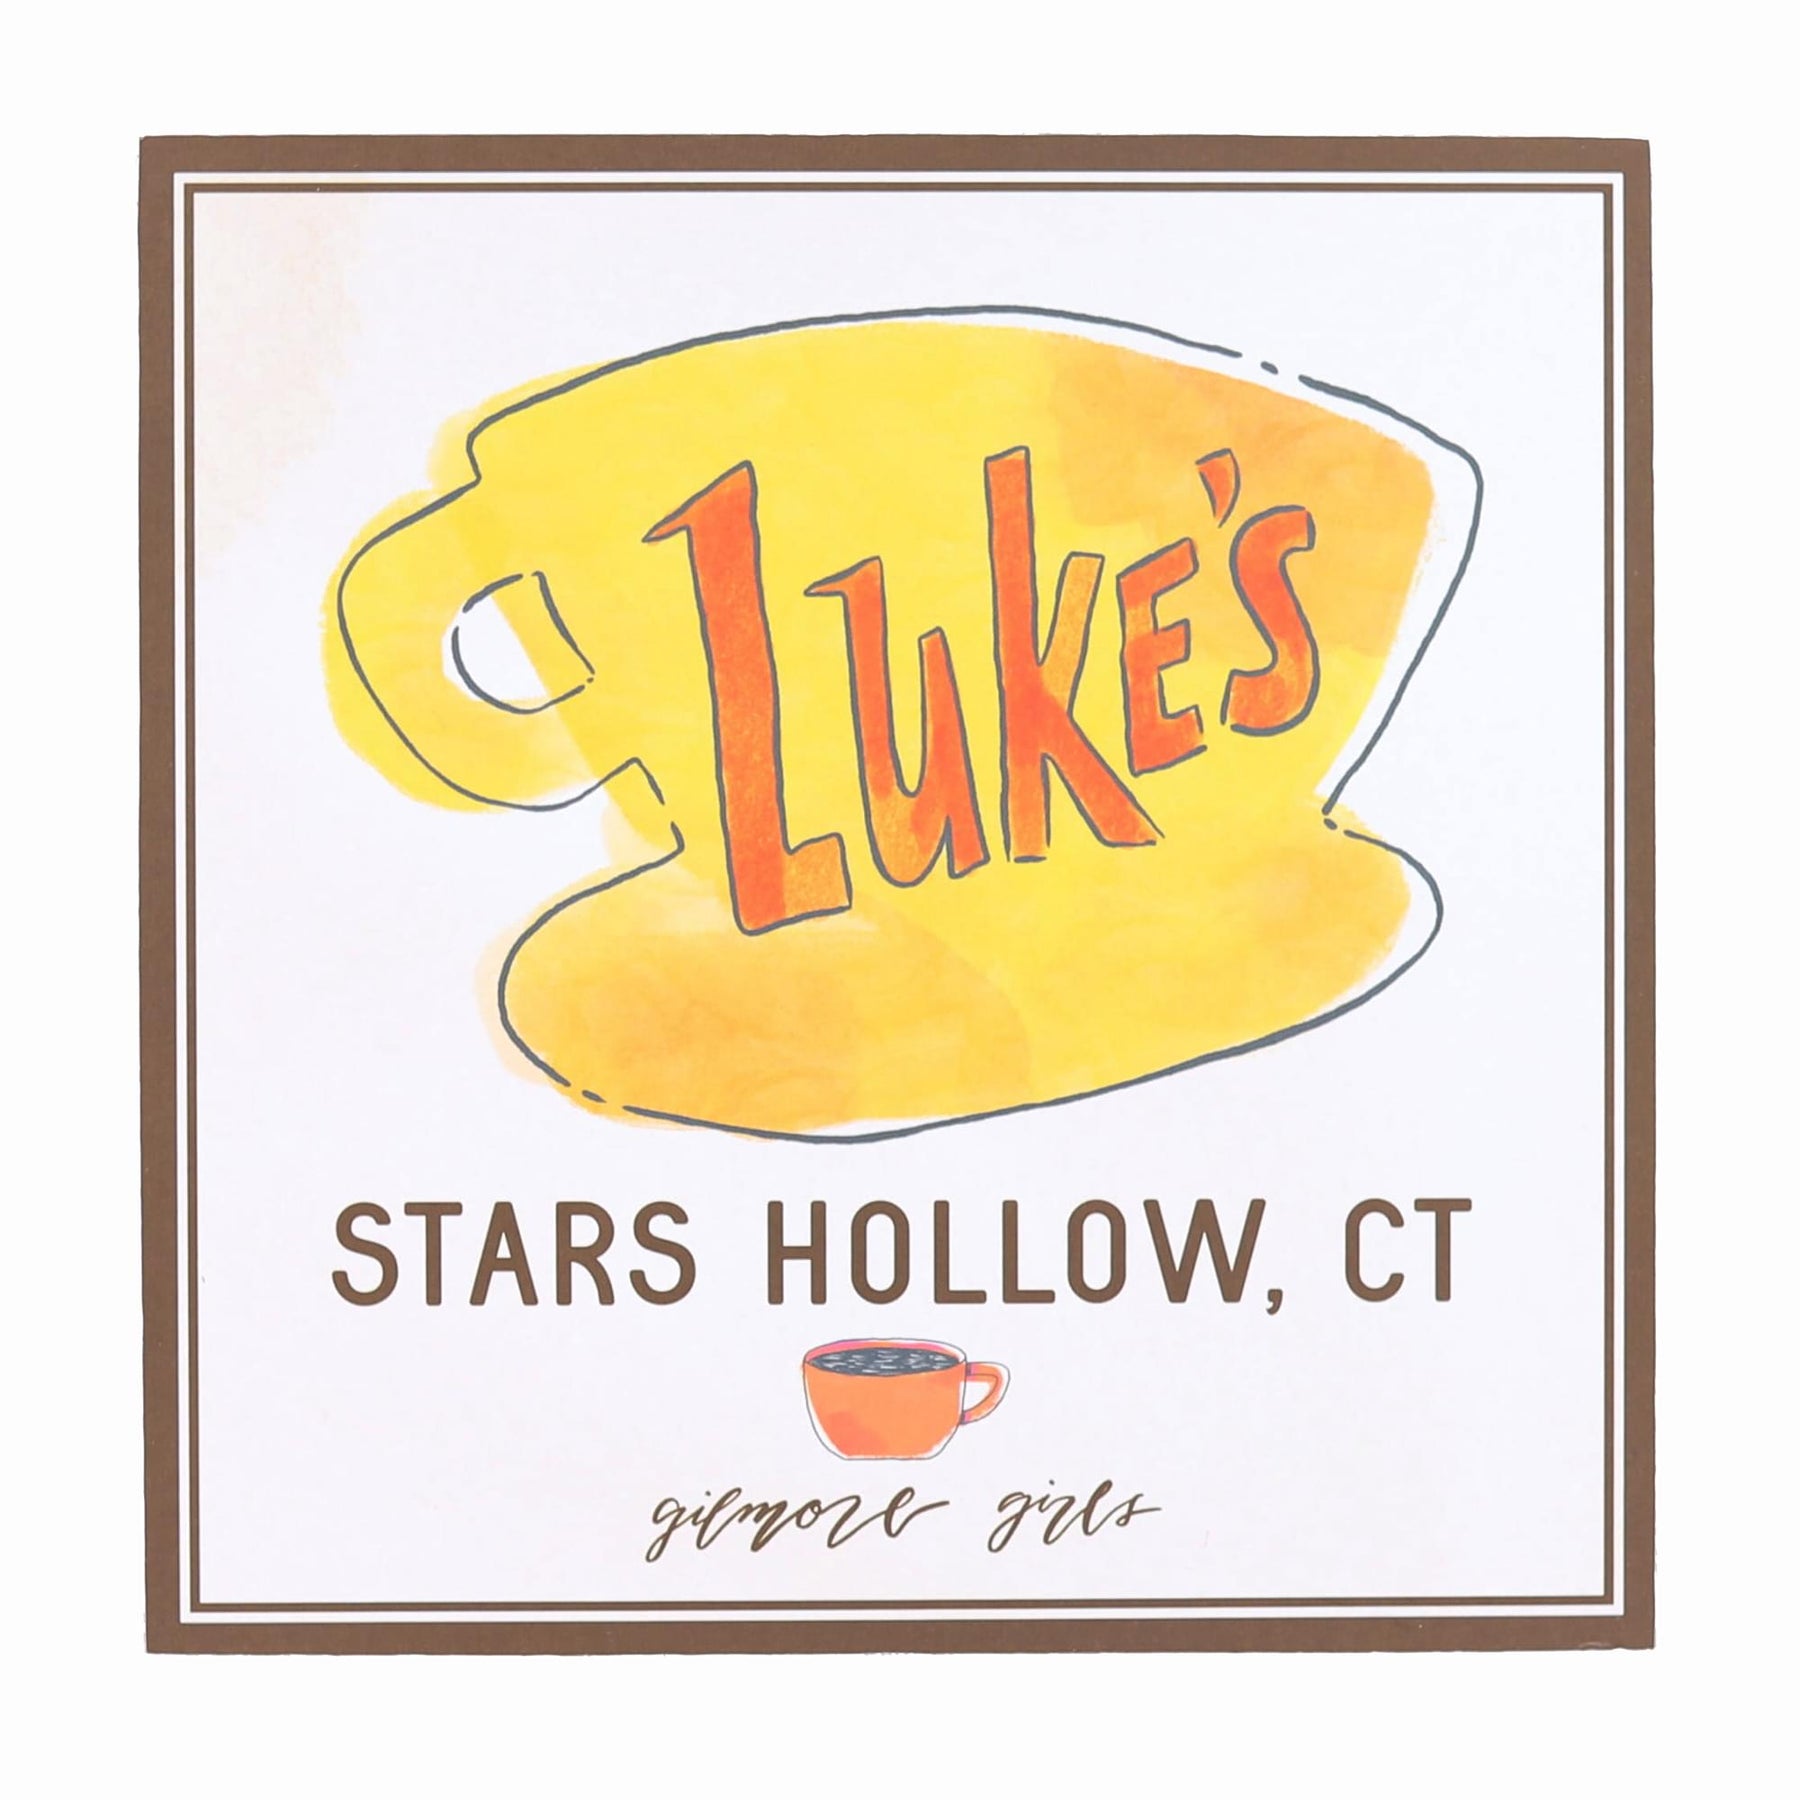 Gilmore Girls Lukes Diner 6 x 6 x 1.5 Inch MDF Wood Wall Art